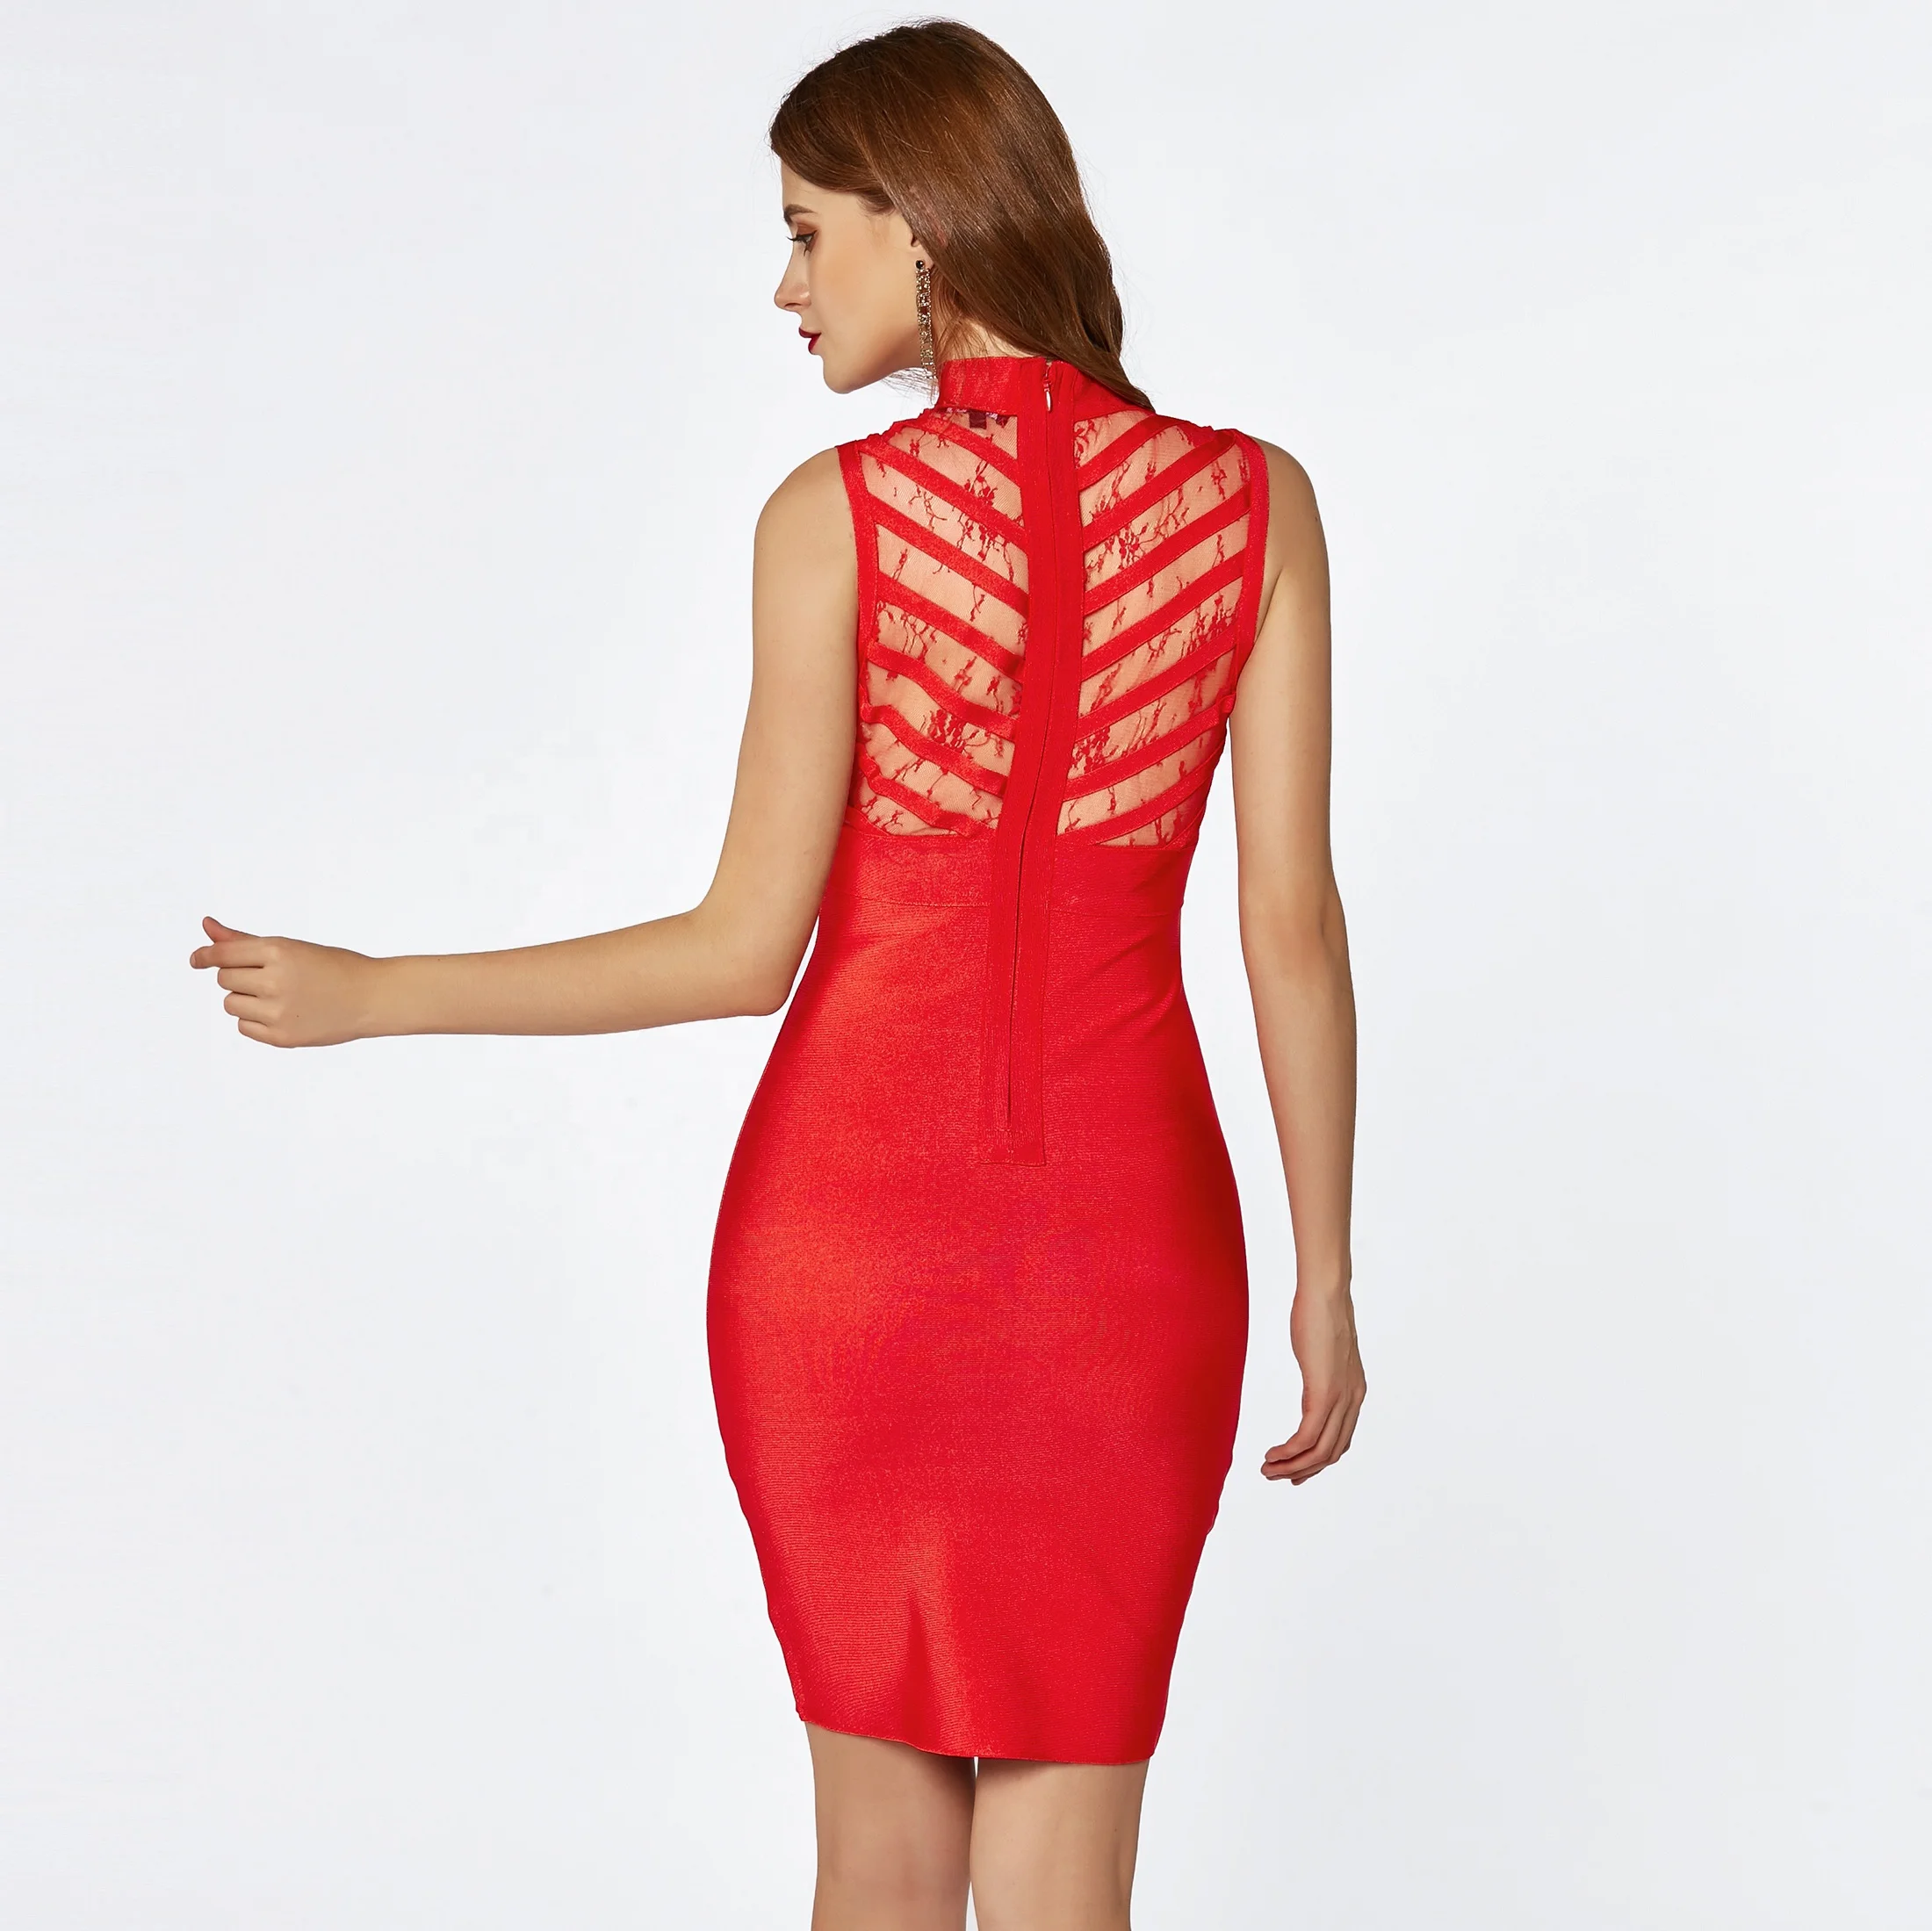 2020 Factory classic red lace evening party midi dresses ladies bodycon bandage dress sexy